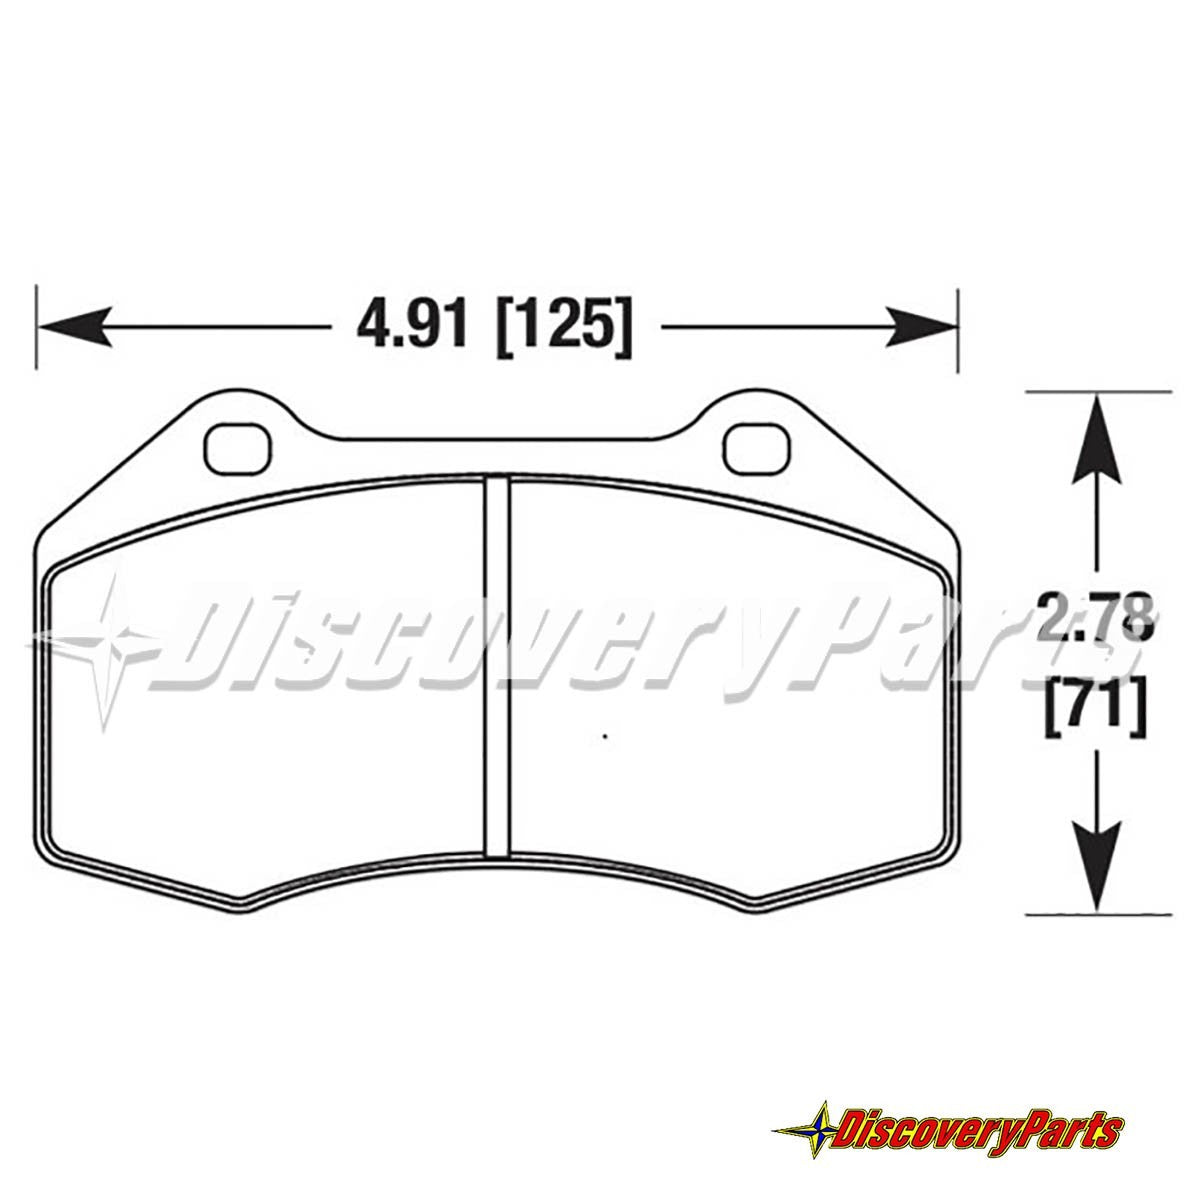 Carbotech CT1903 Brake Pads For Mazda ND non-Brembo Front